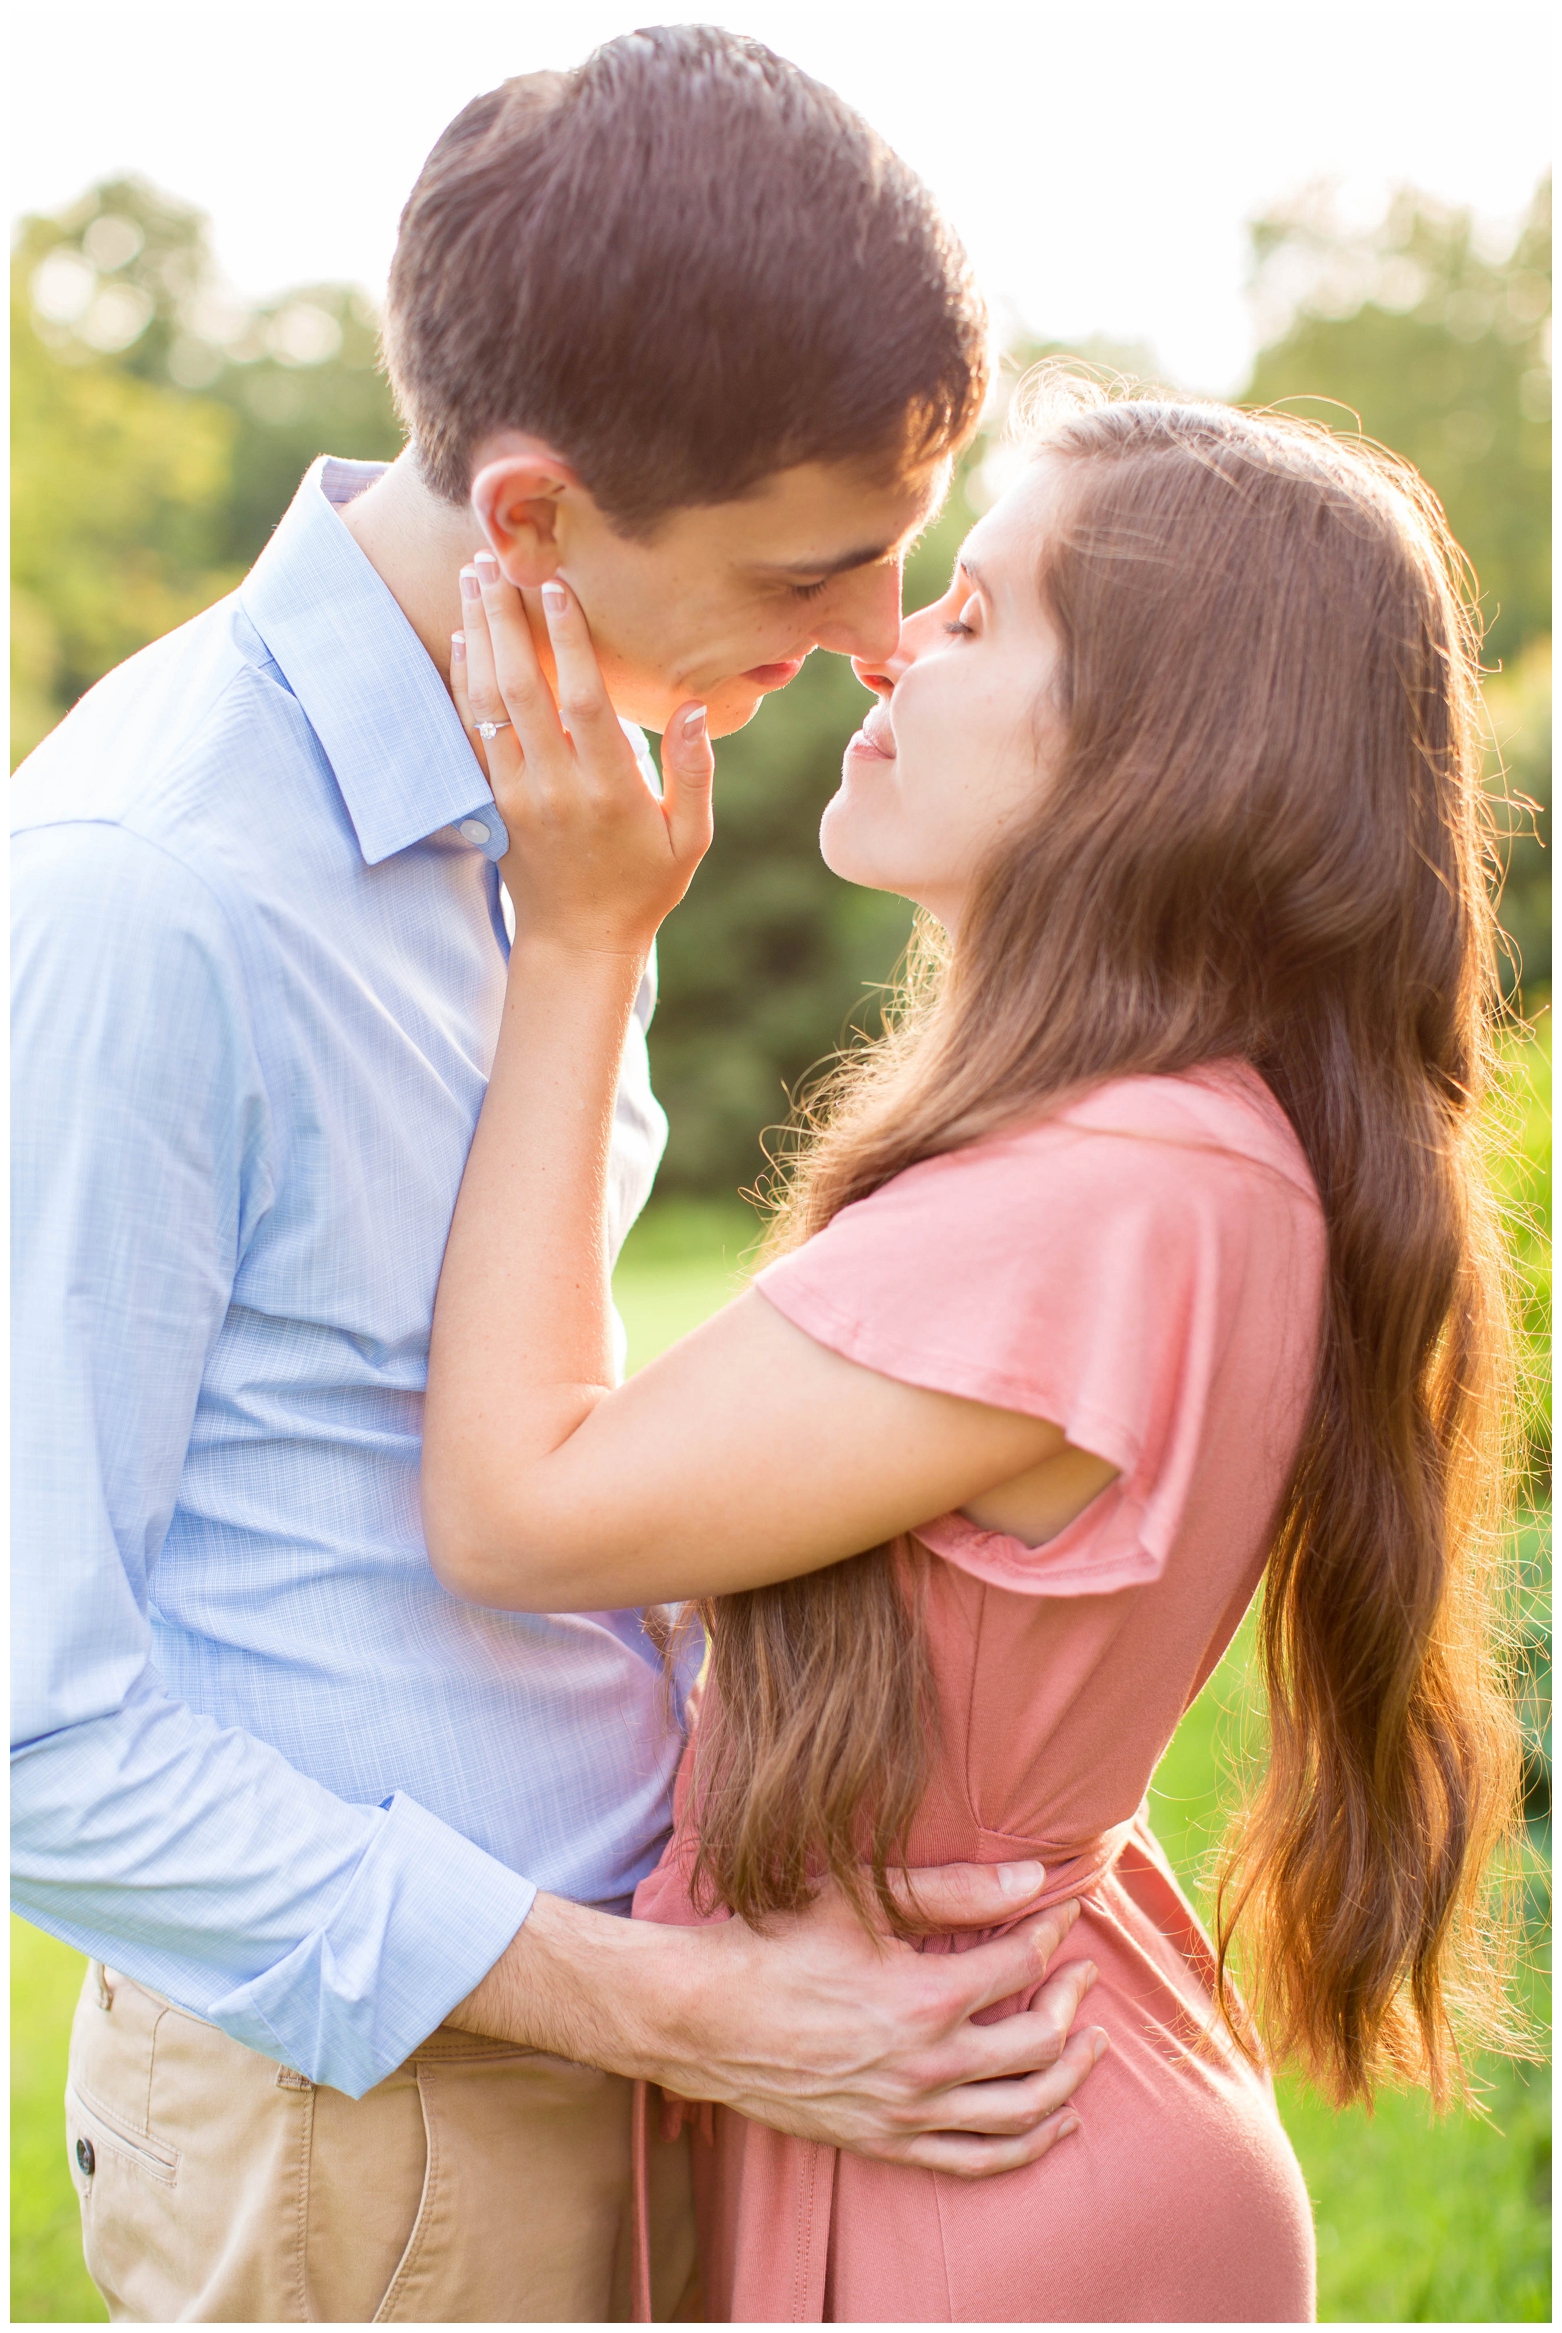 View More: http://hopetaylorphotographyphotos.pass.us/chelsea-and-neal-engagement